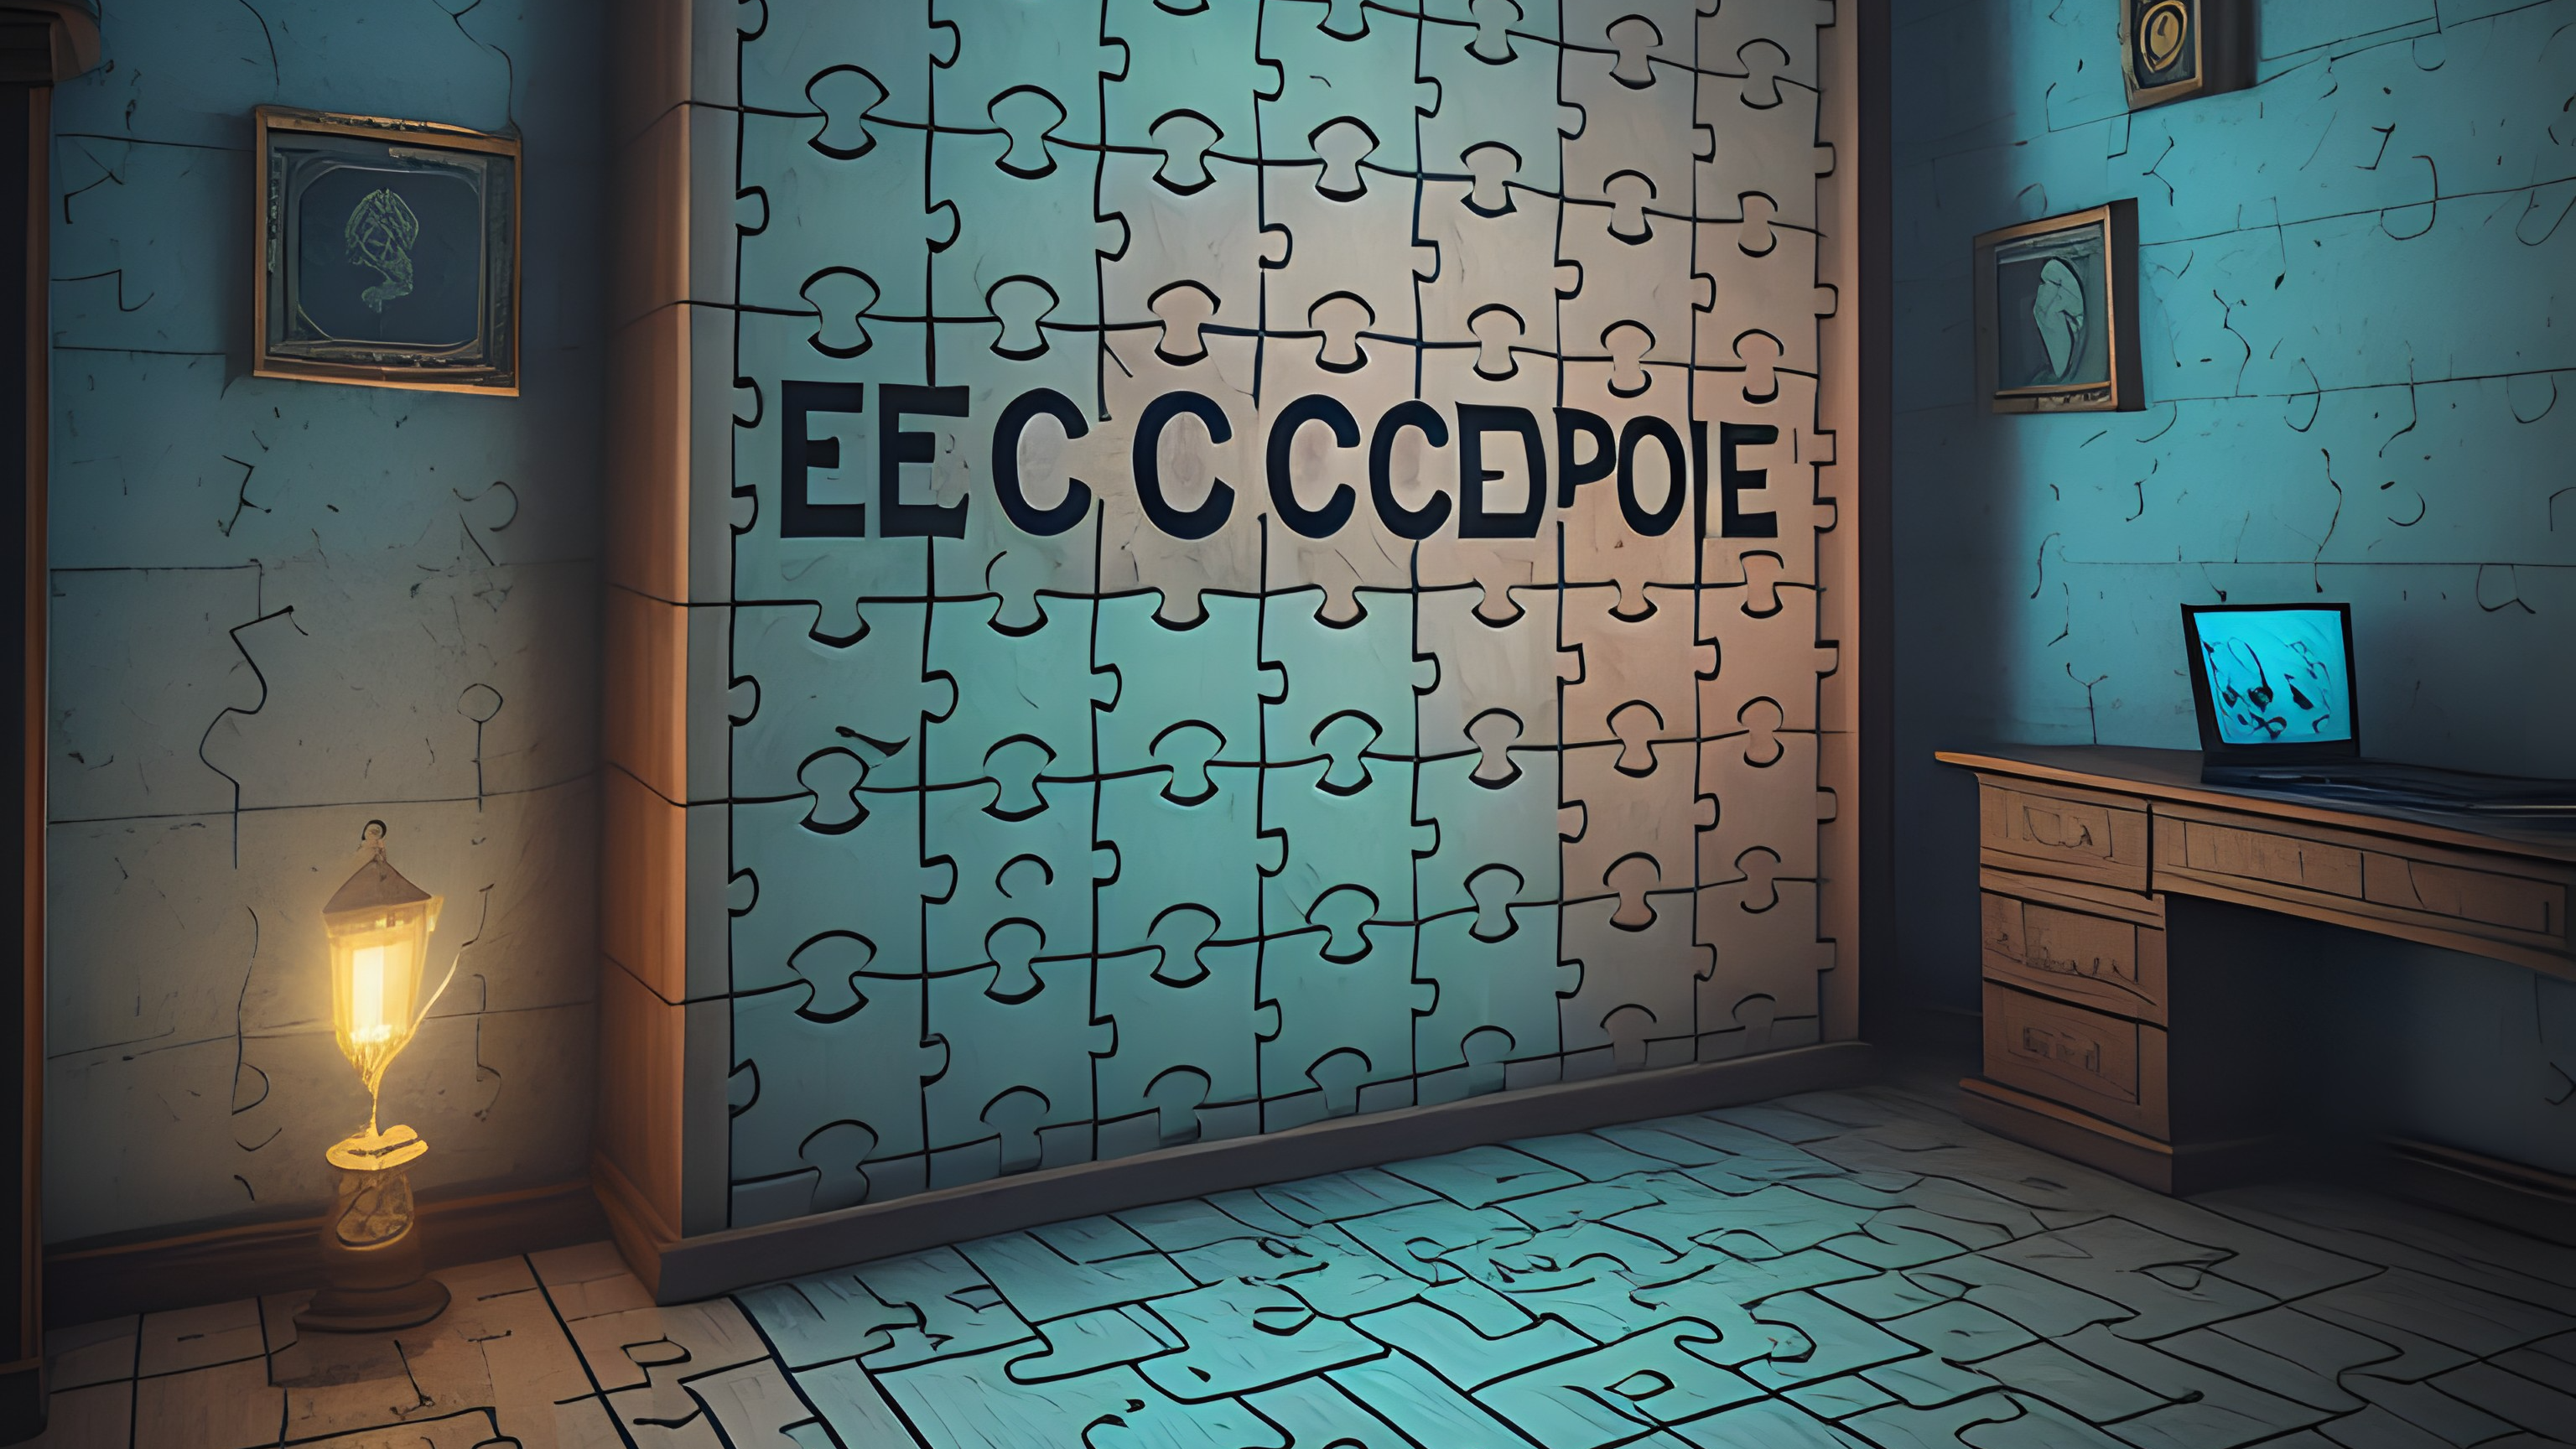 Crack the Code Escape Room Puzzle game Theme Top-rated rooms Escape room experience Duration Age restrictions